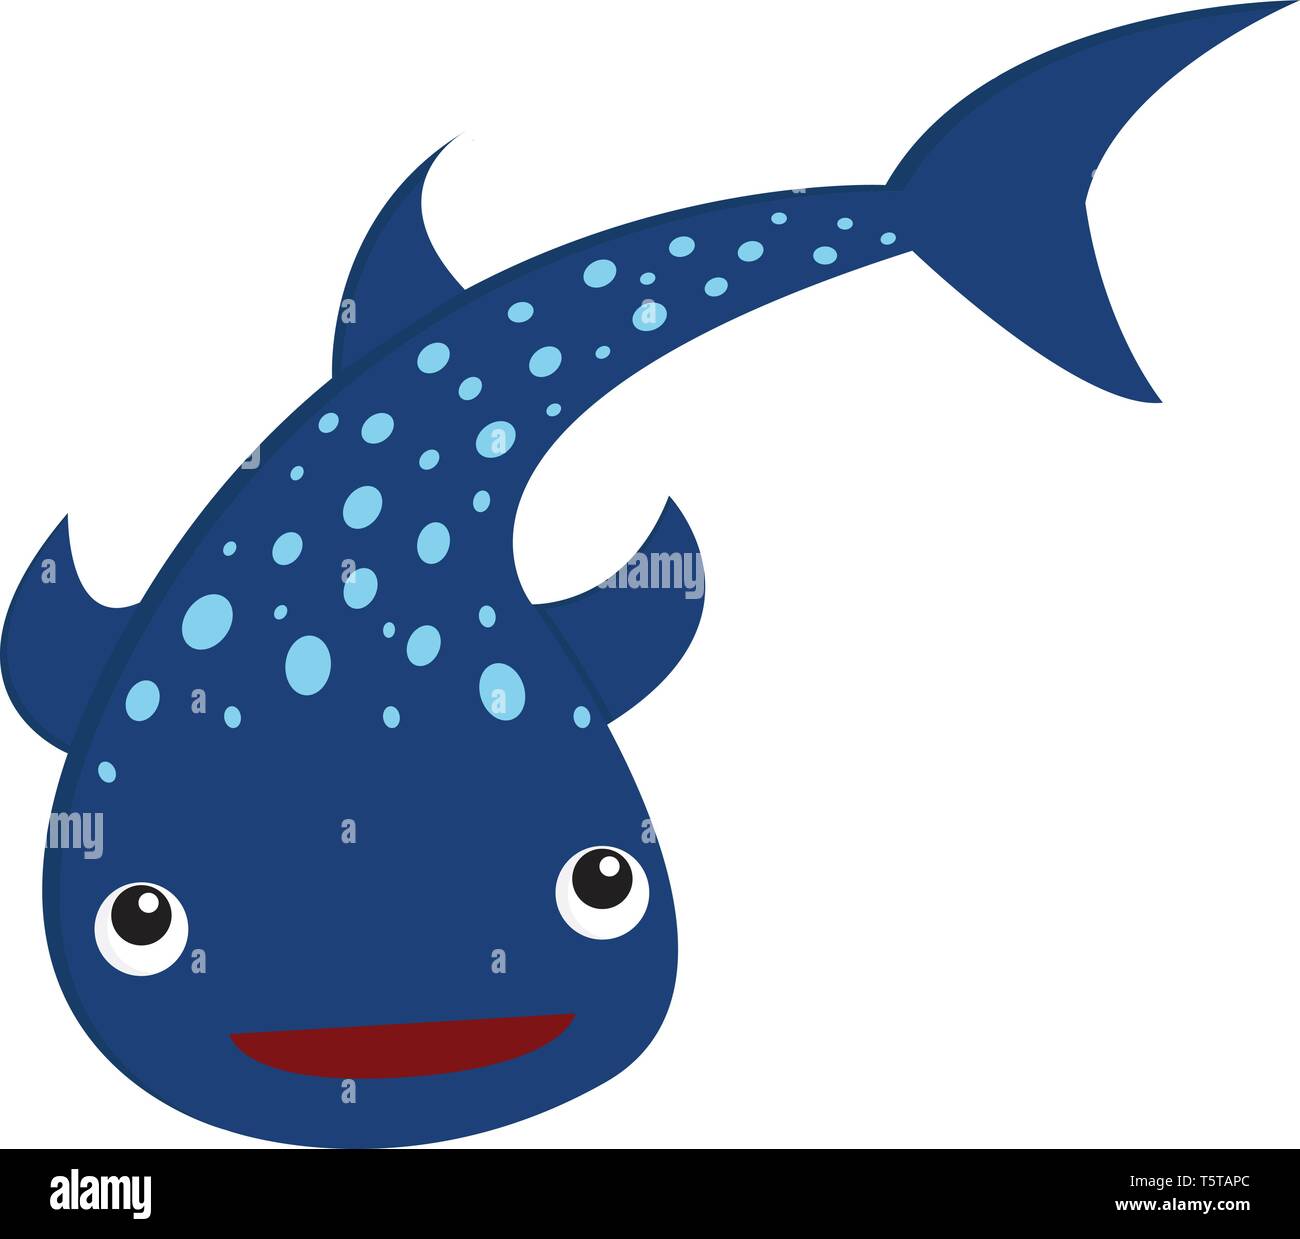 Blue smiling zebra shark with distinct spherical dots on its cylindrical body has a slightly flattened head and a short blunt snout with small eyes pl Stock Vector